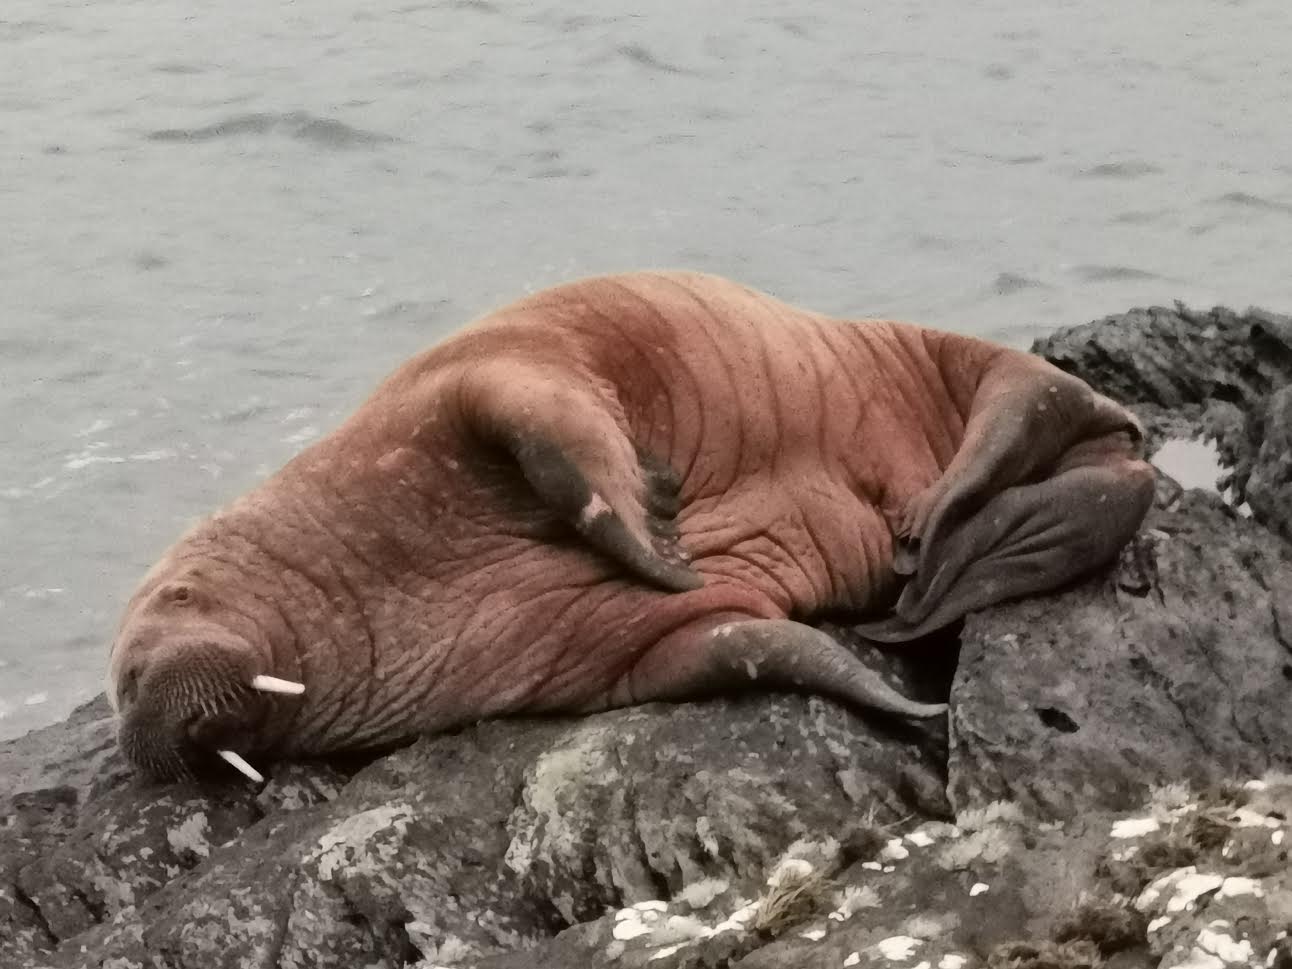 Arctic Walrus travel thousands of miles to Ireland after probably falling asleep on the Iceberg